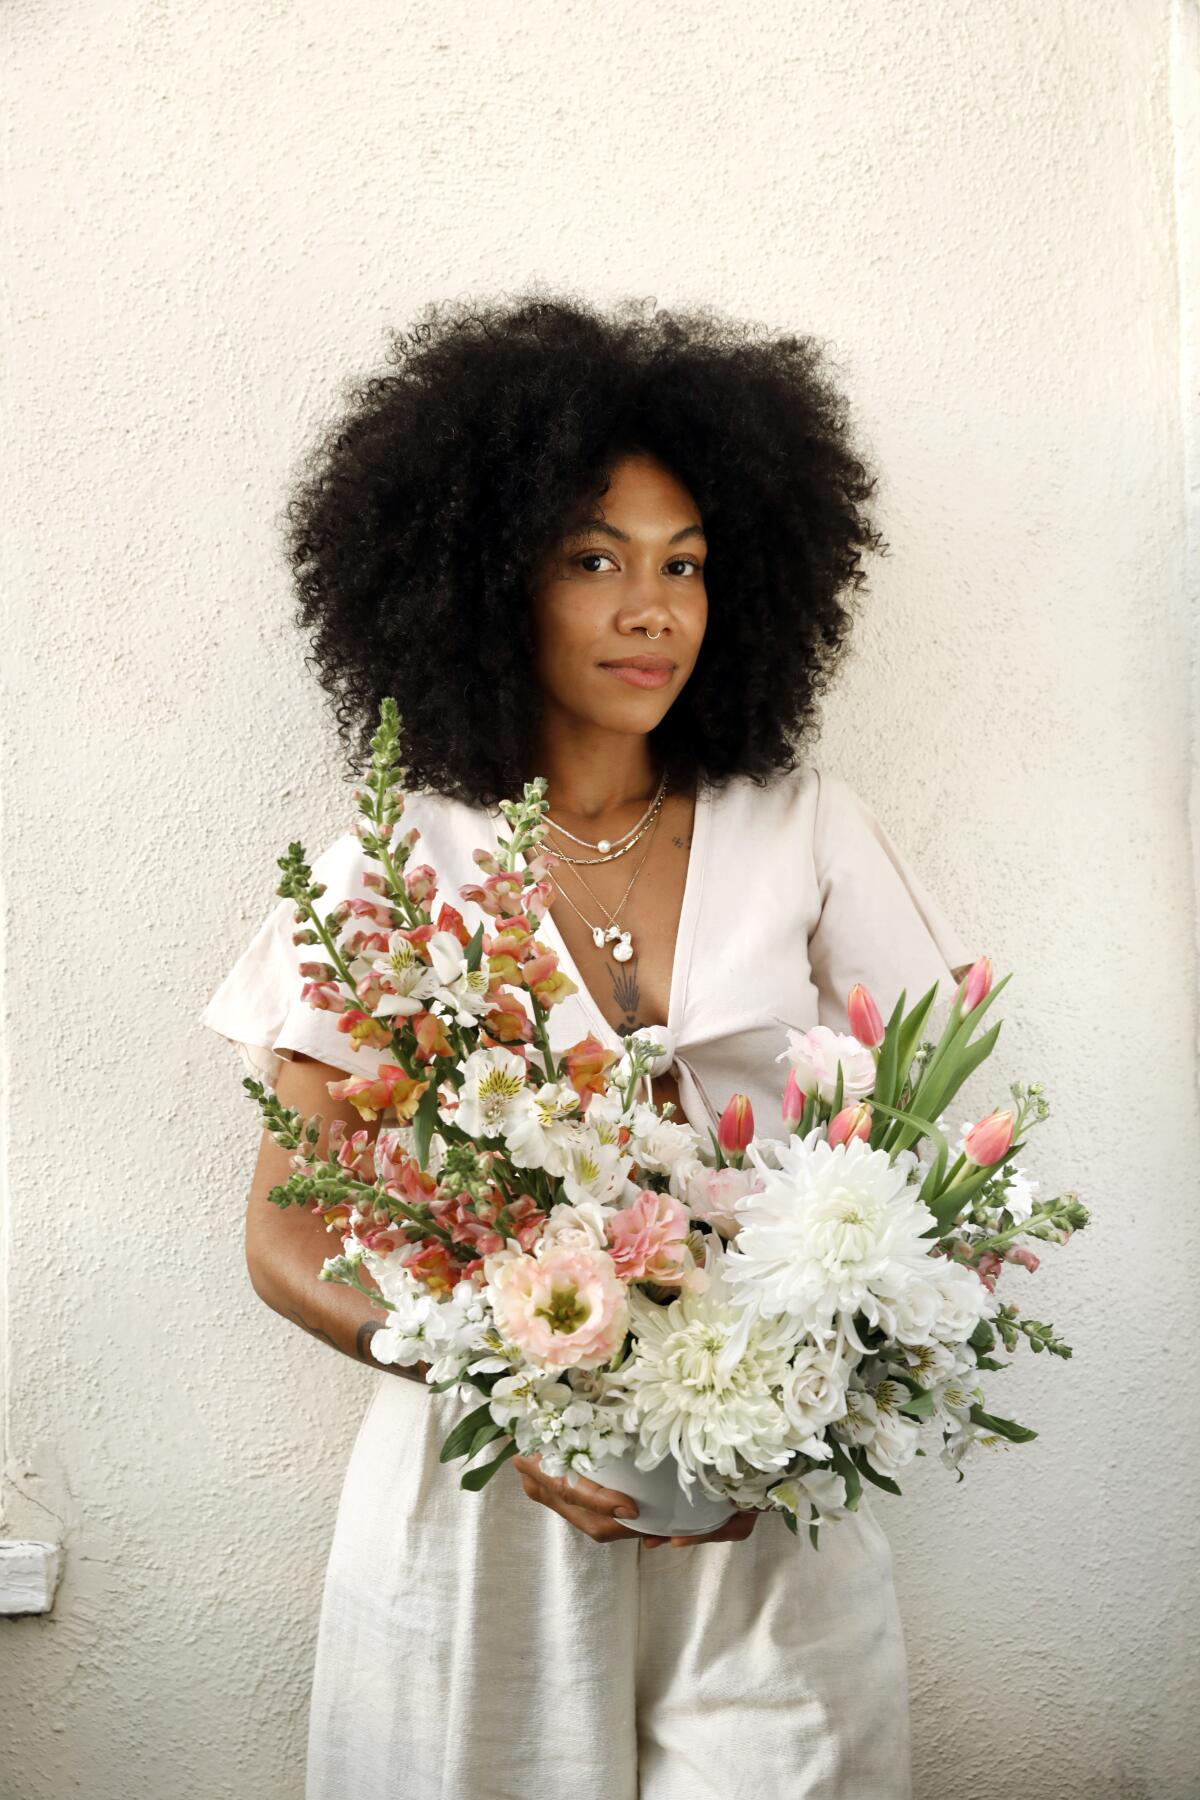 Schentell Nunn in her West Adams home with the arrangement she created with $40 worth of flowers from Trader Joe's.